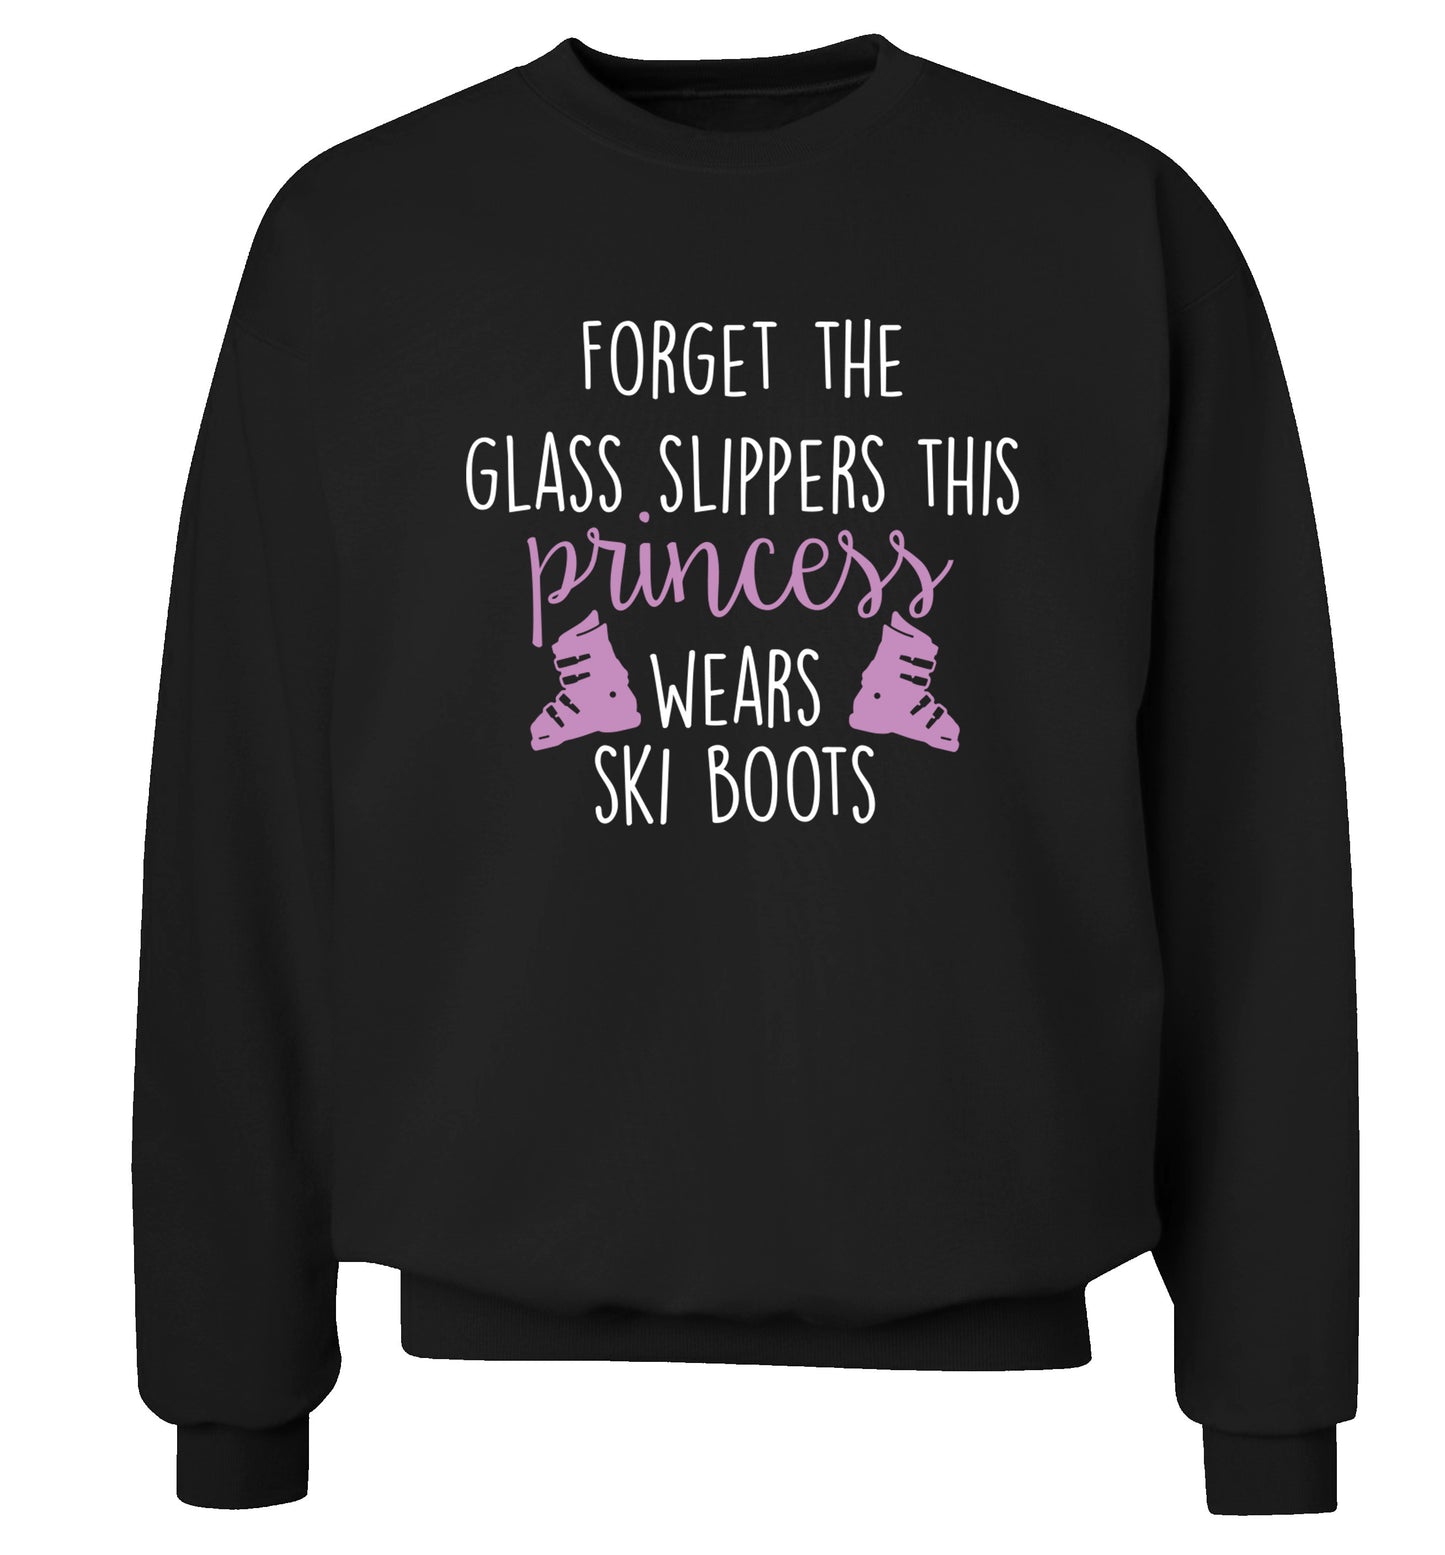 Forget the glass slippers this princess wears ski boots Adult's unisex black Sweater 2XL